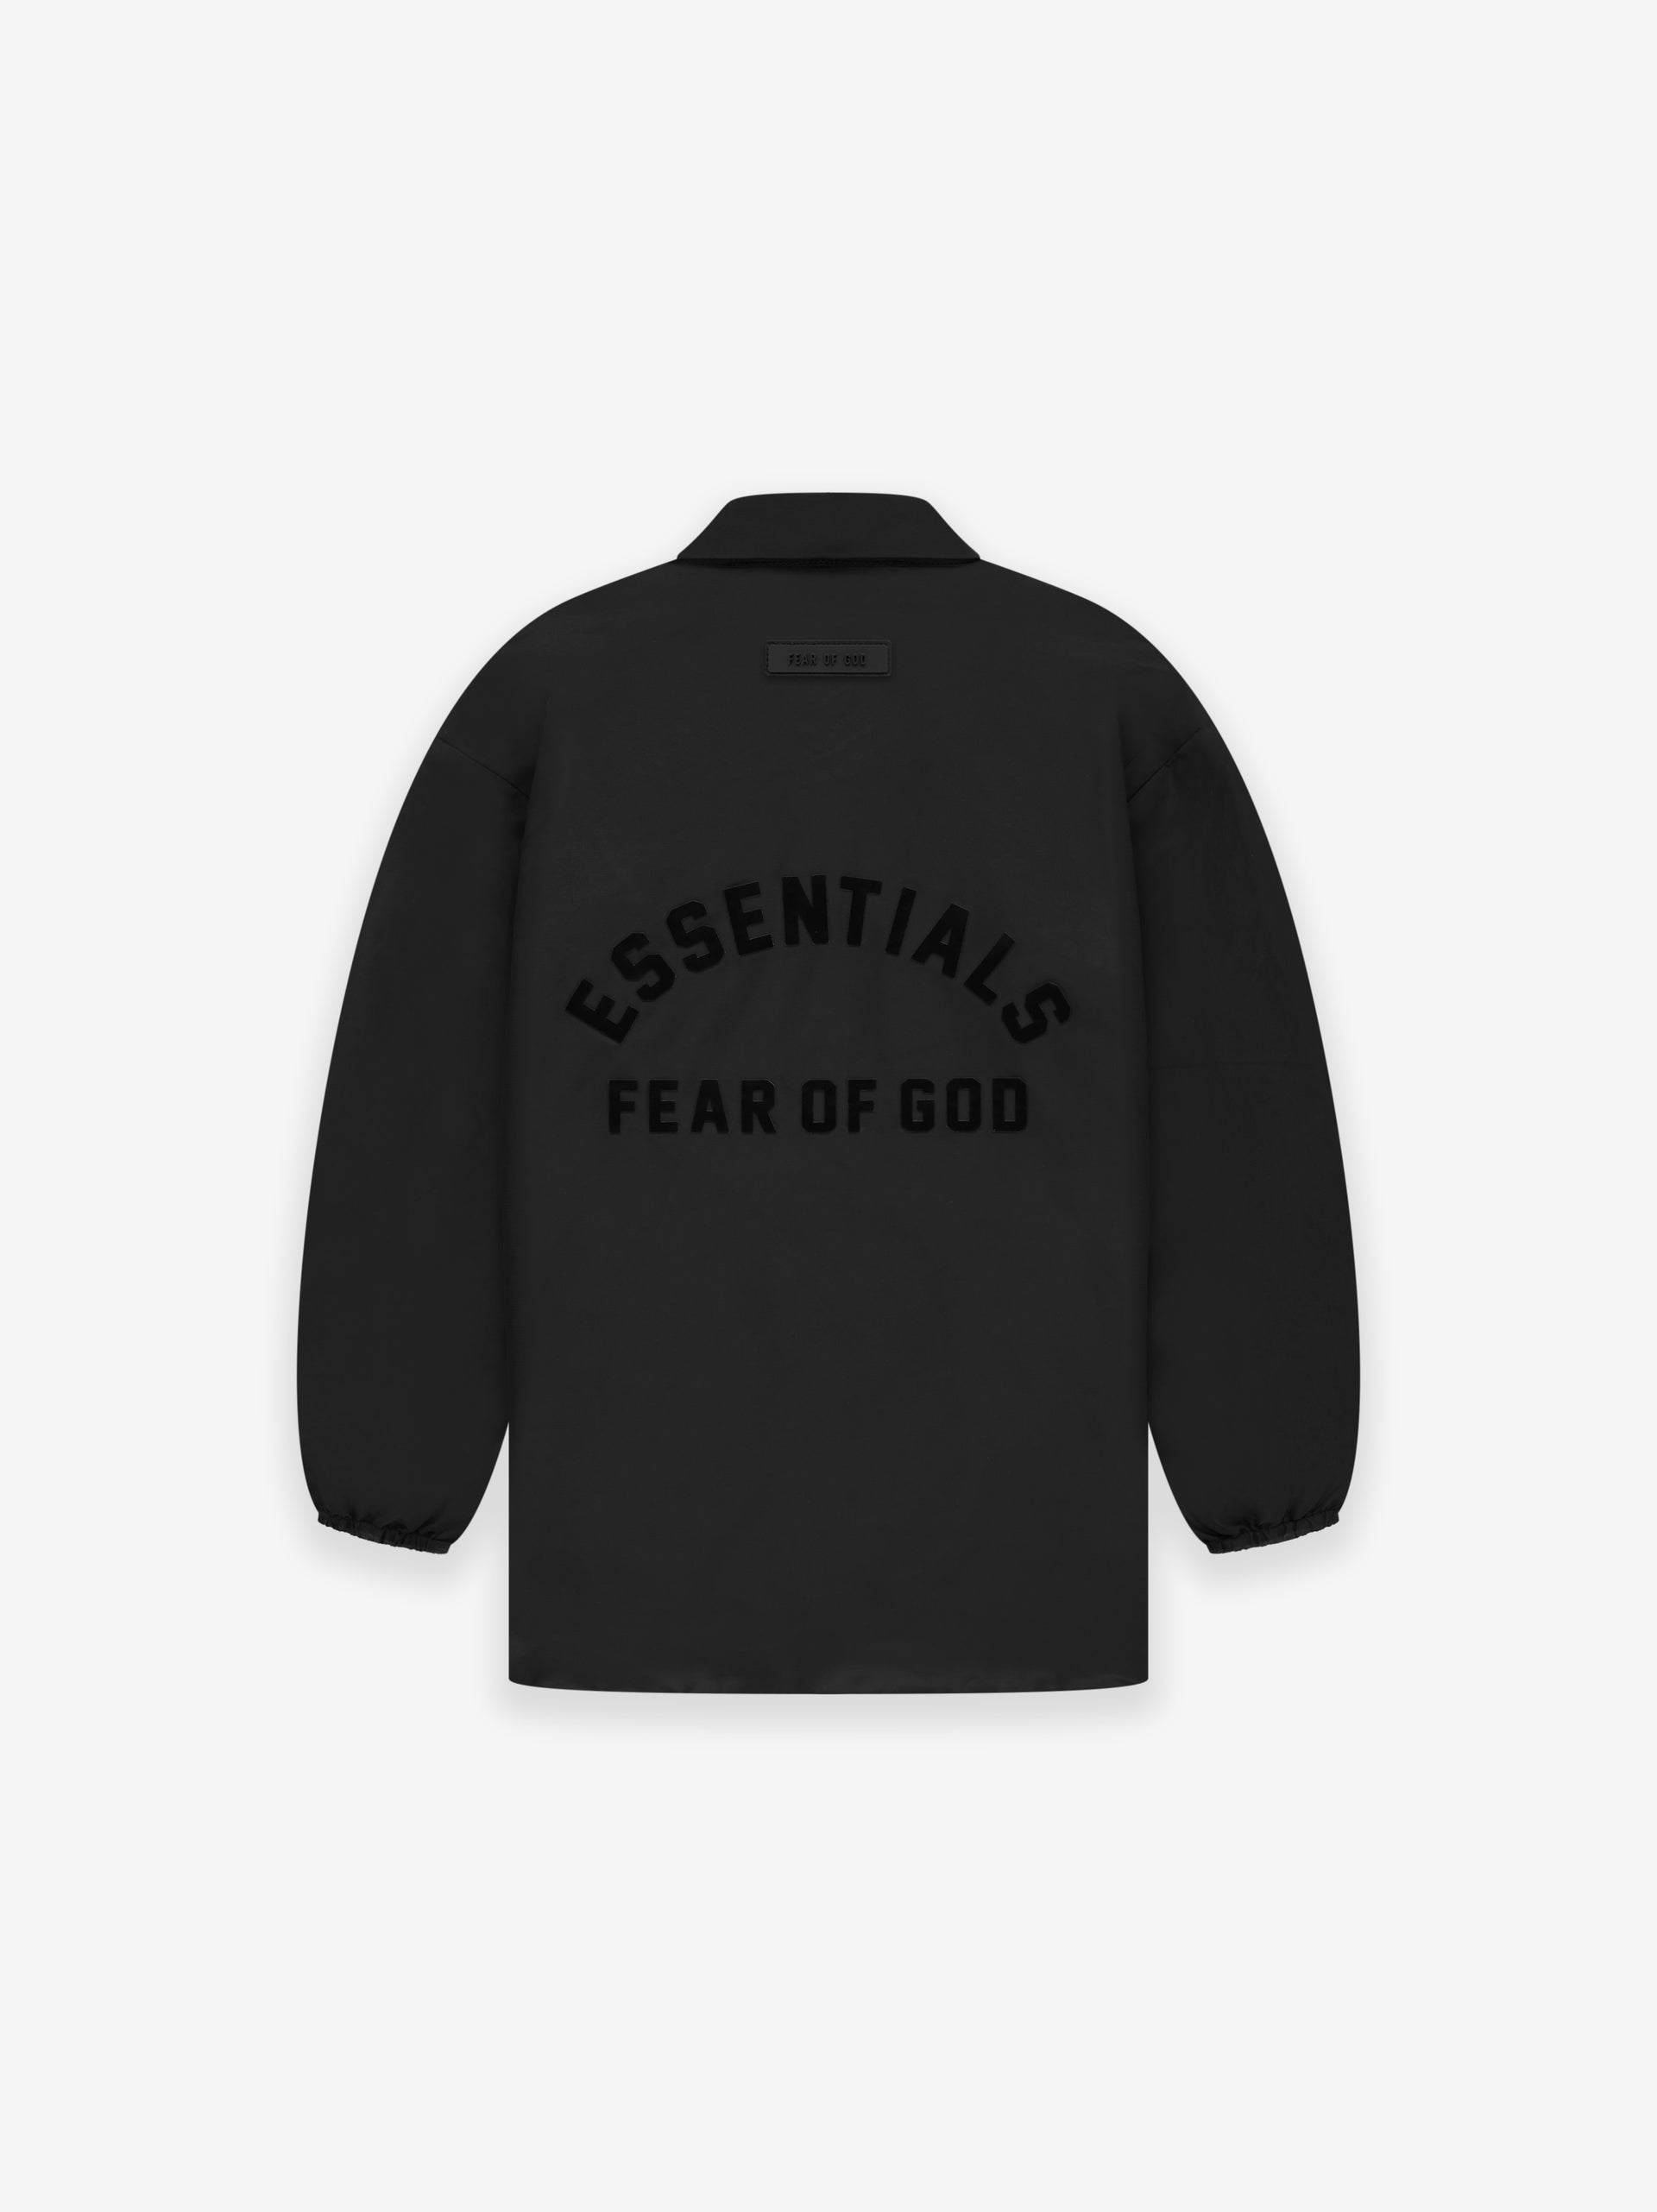 ESSENTIALS Coaches Jacket in Jet Black | Fear of God